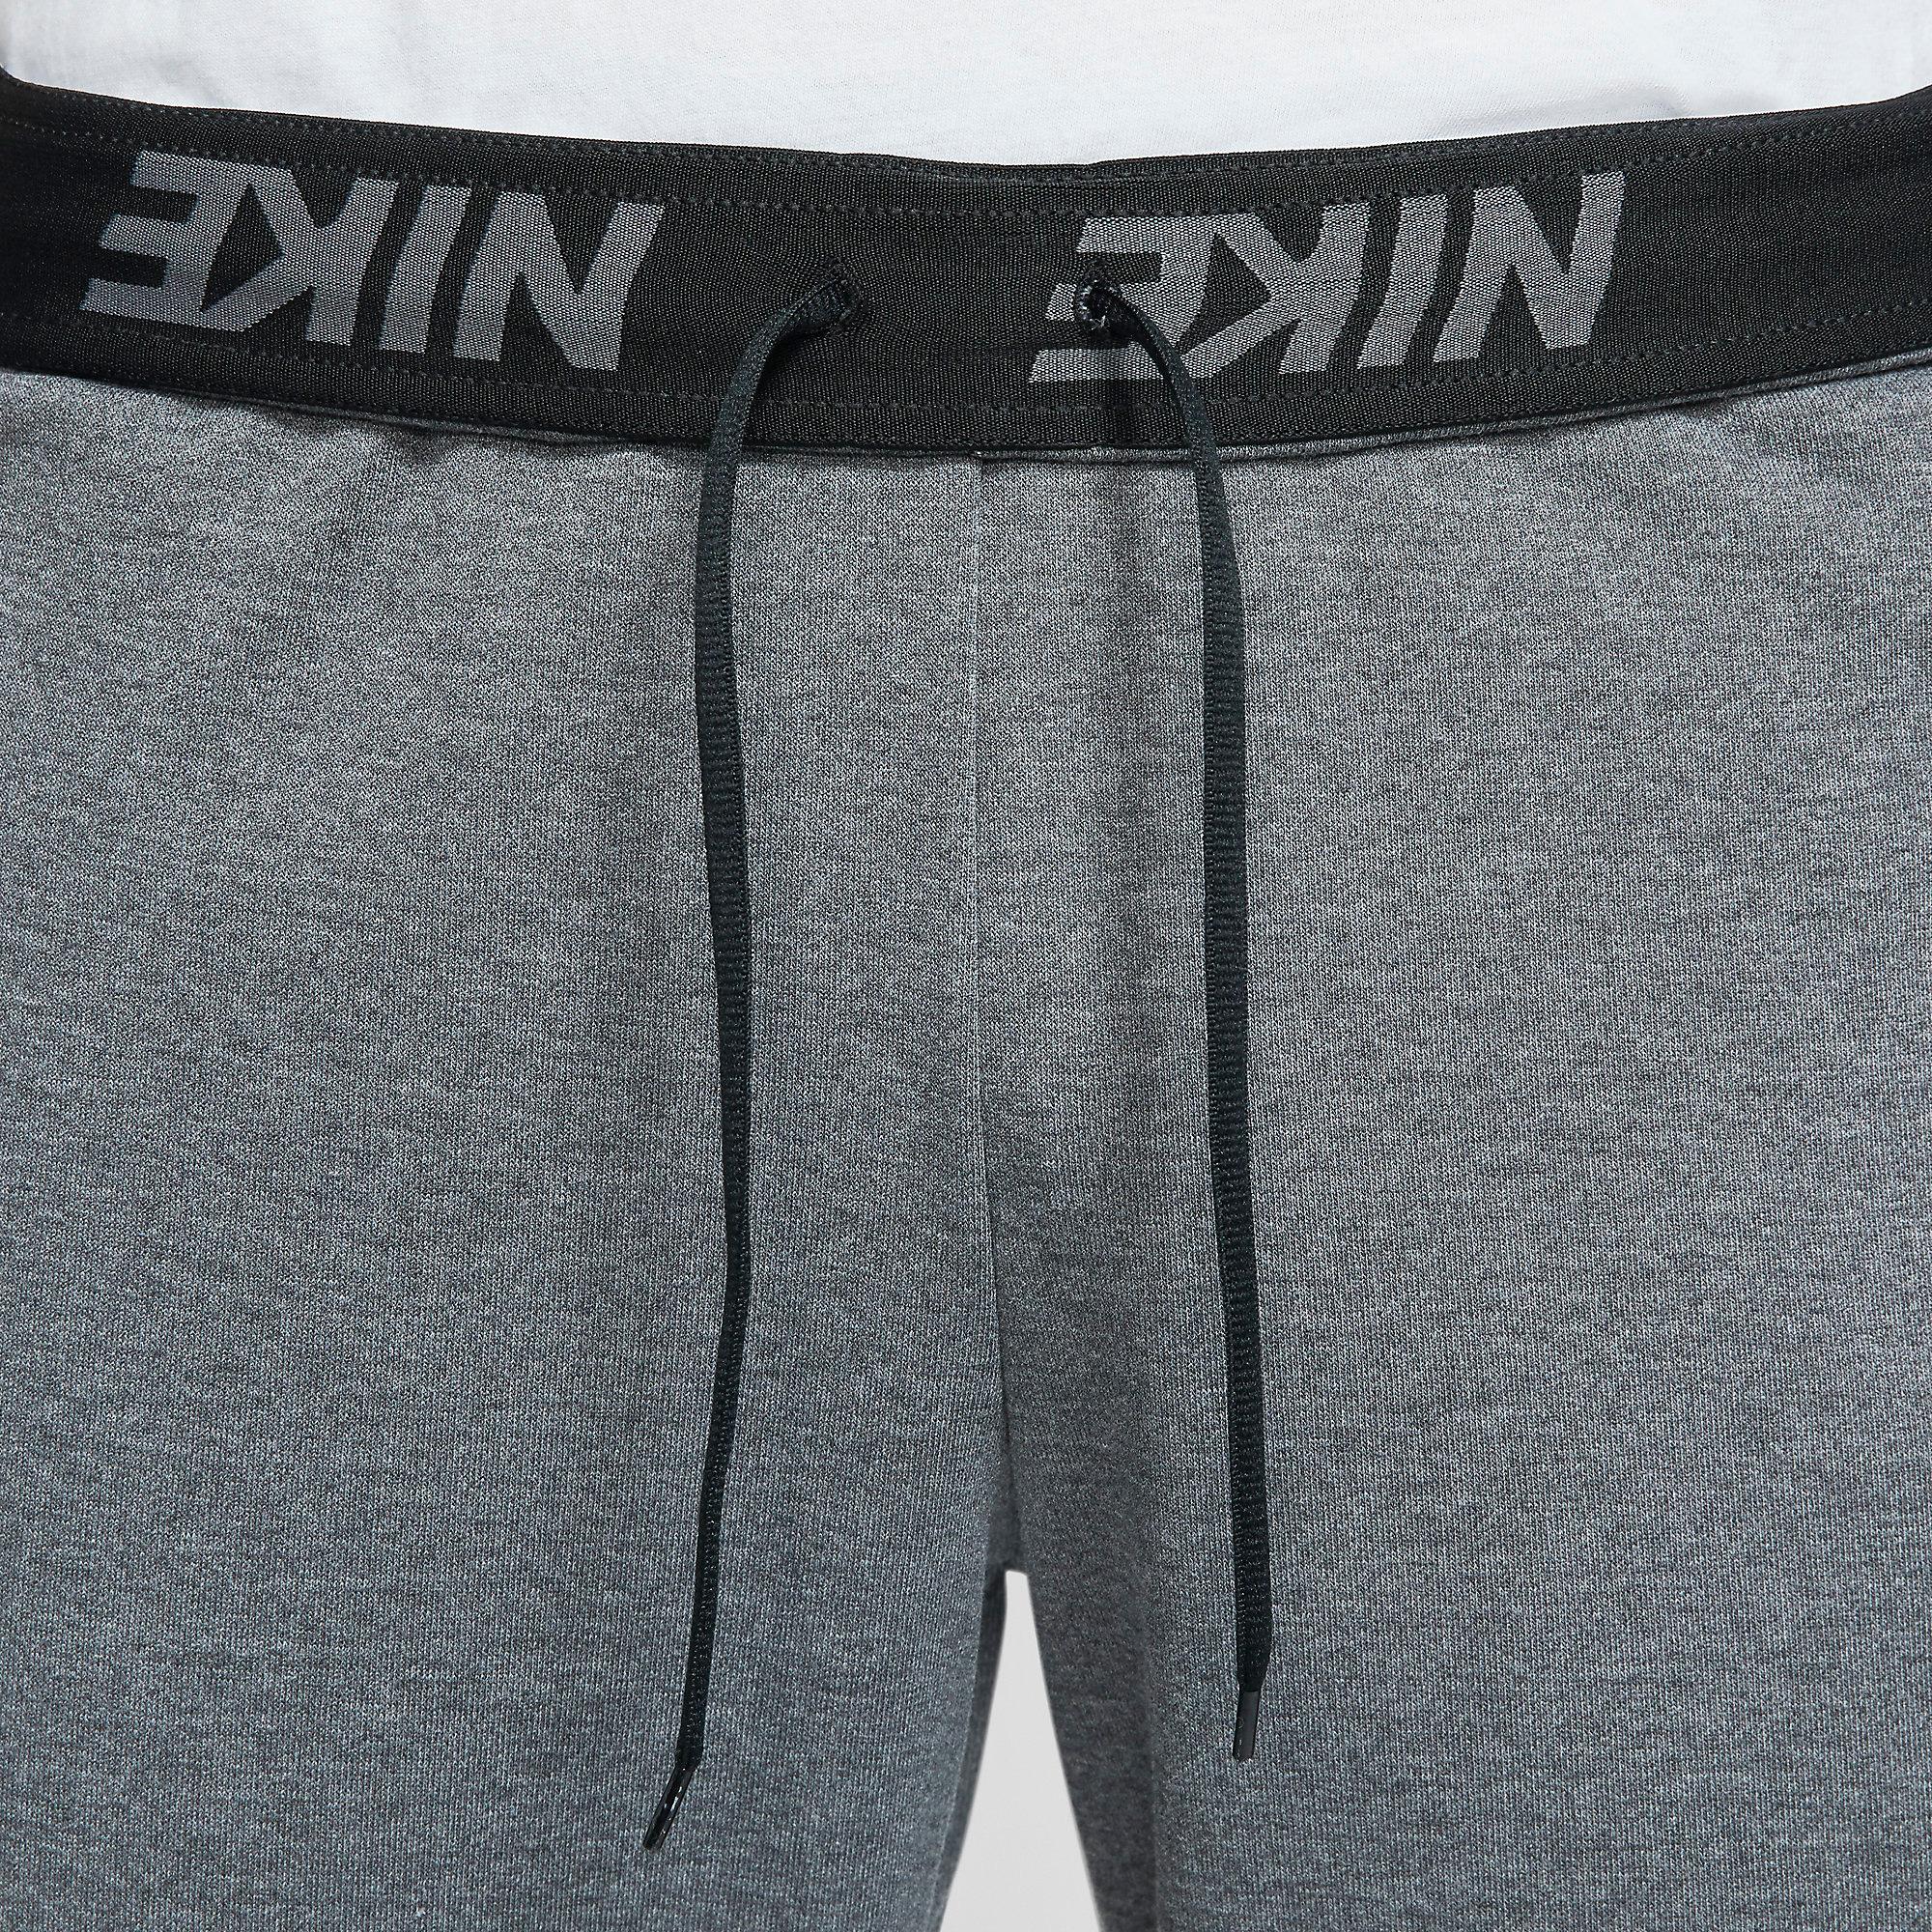 Nike Mens Dri-FIT Tapered Fleece Training Trousers - Charcoal Heather ...